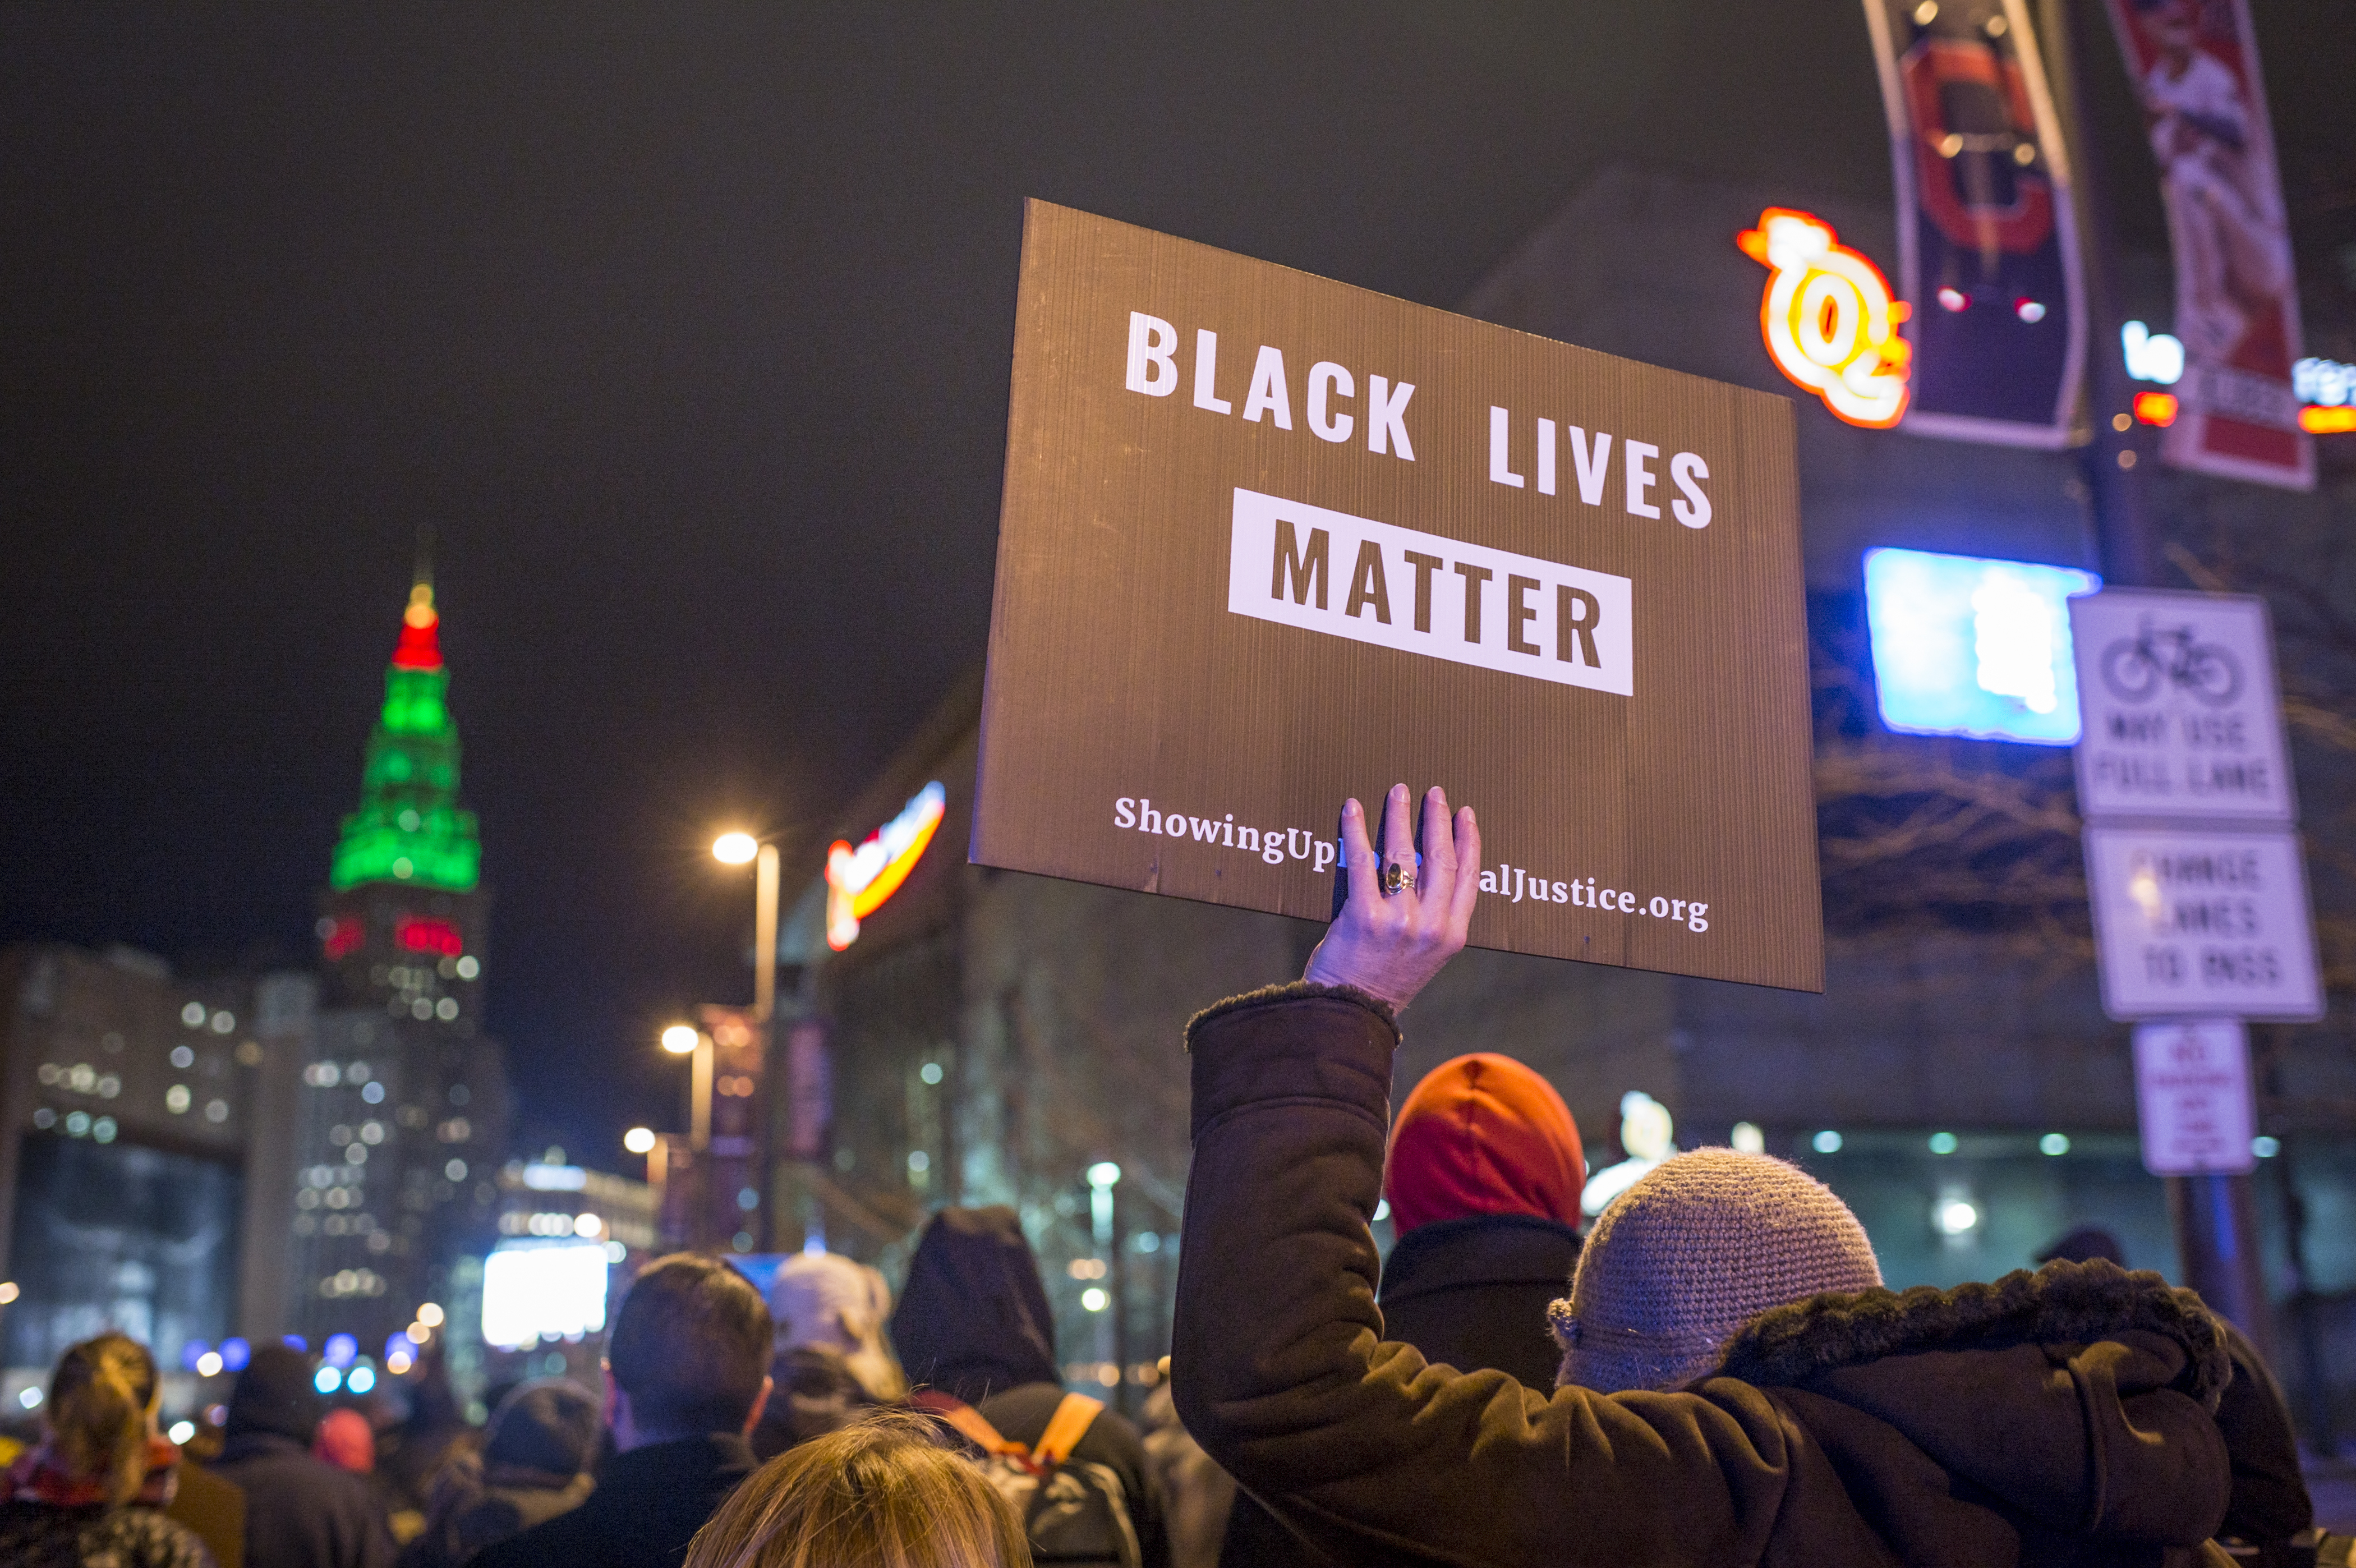 Demonstrators march on Ontario St. in Cleveland, Ohio, on Dec. 29, 2015